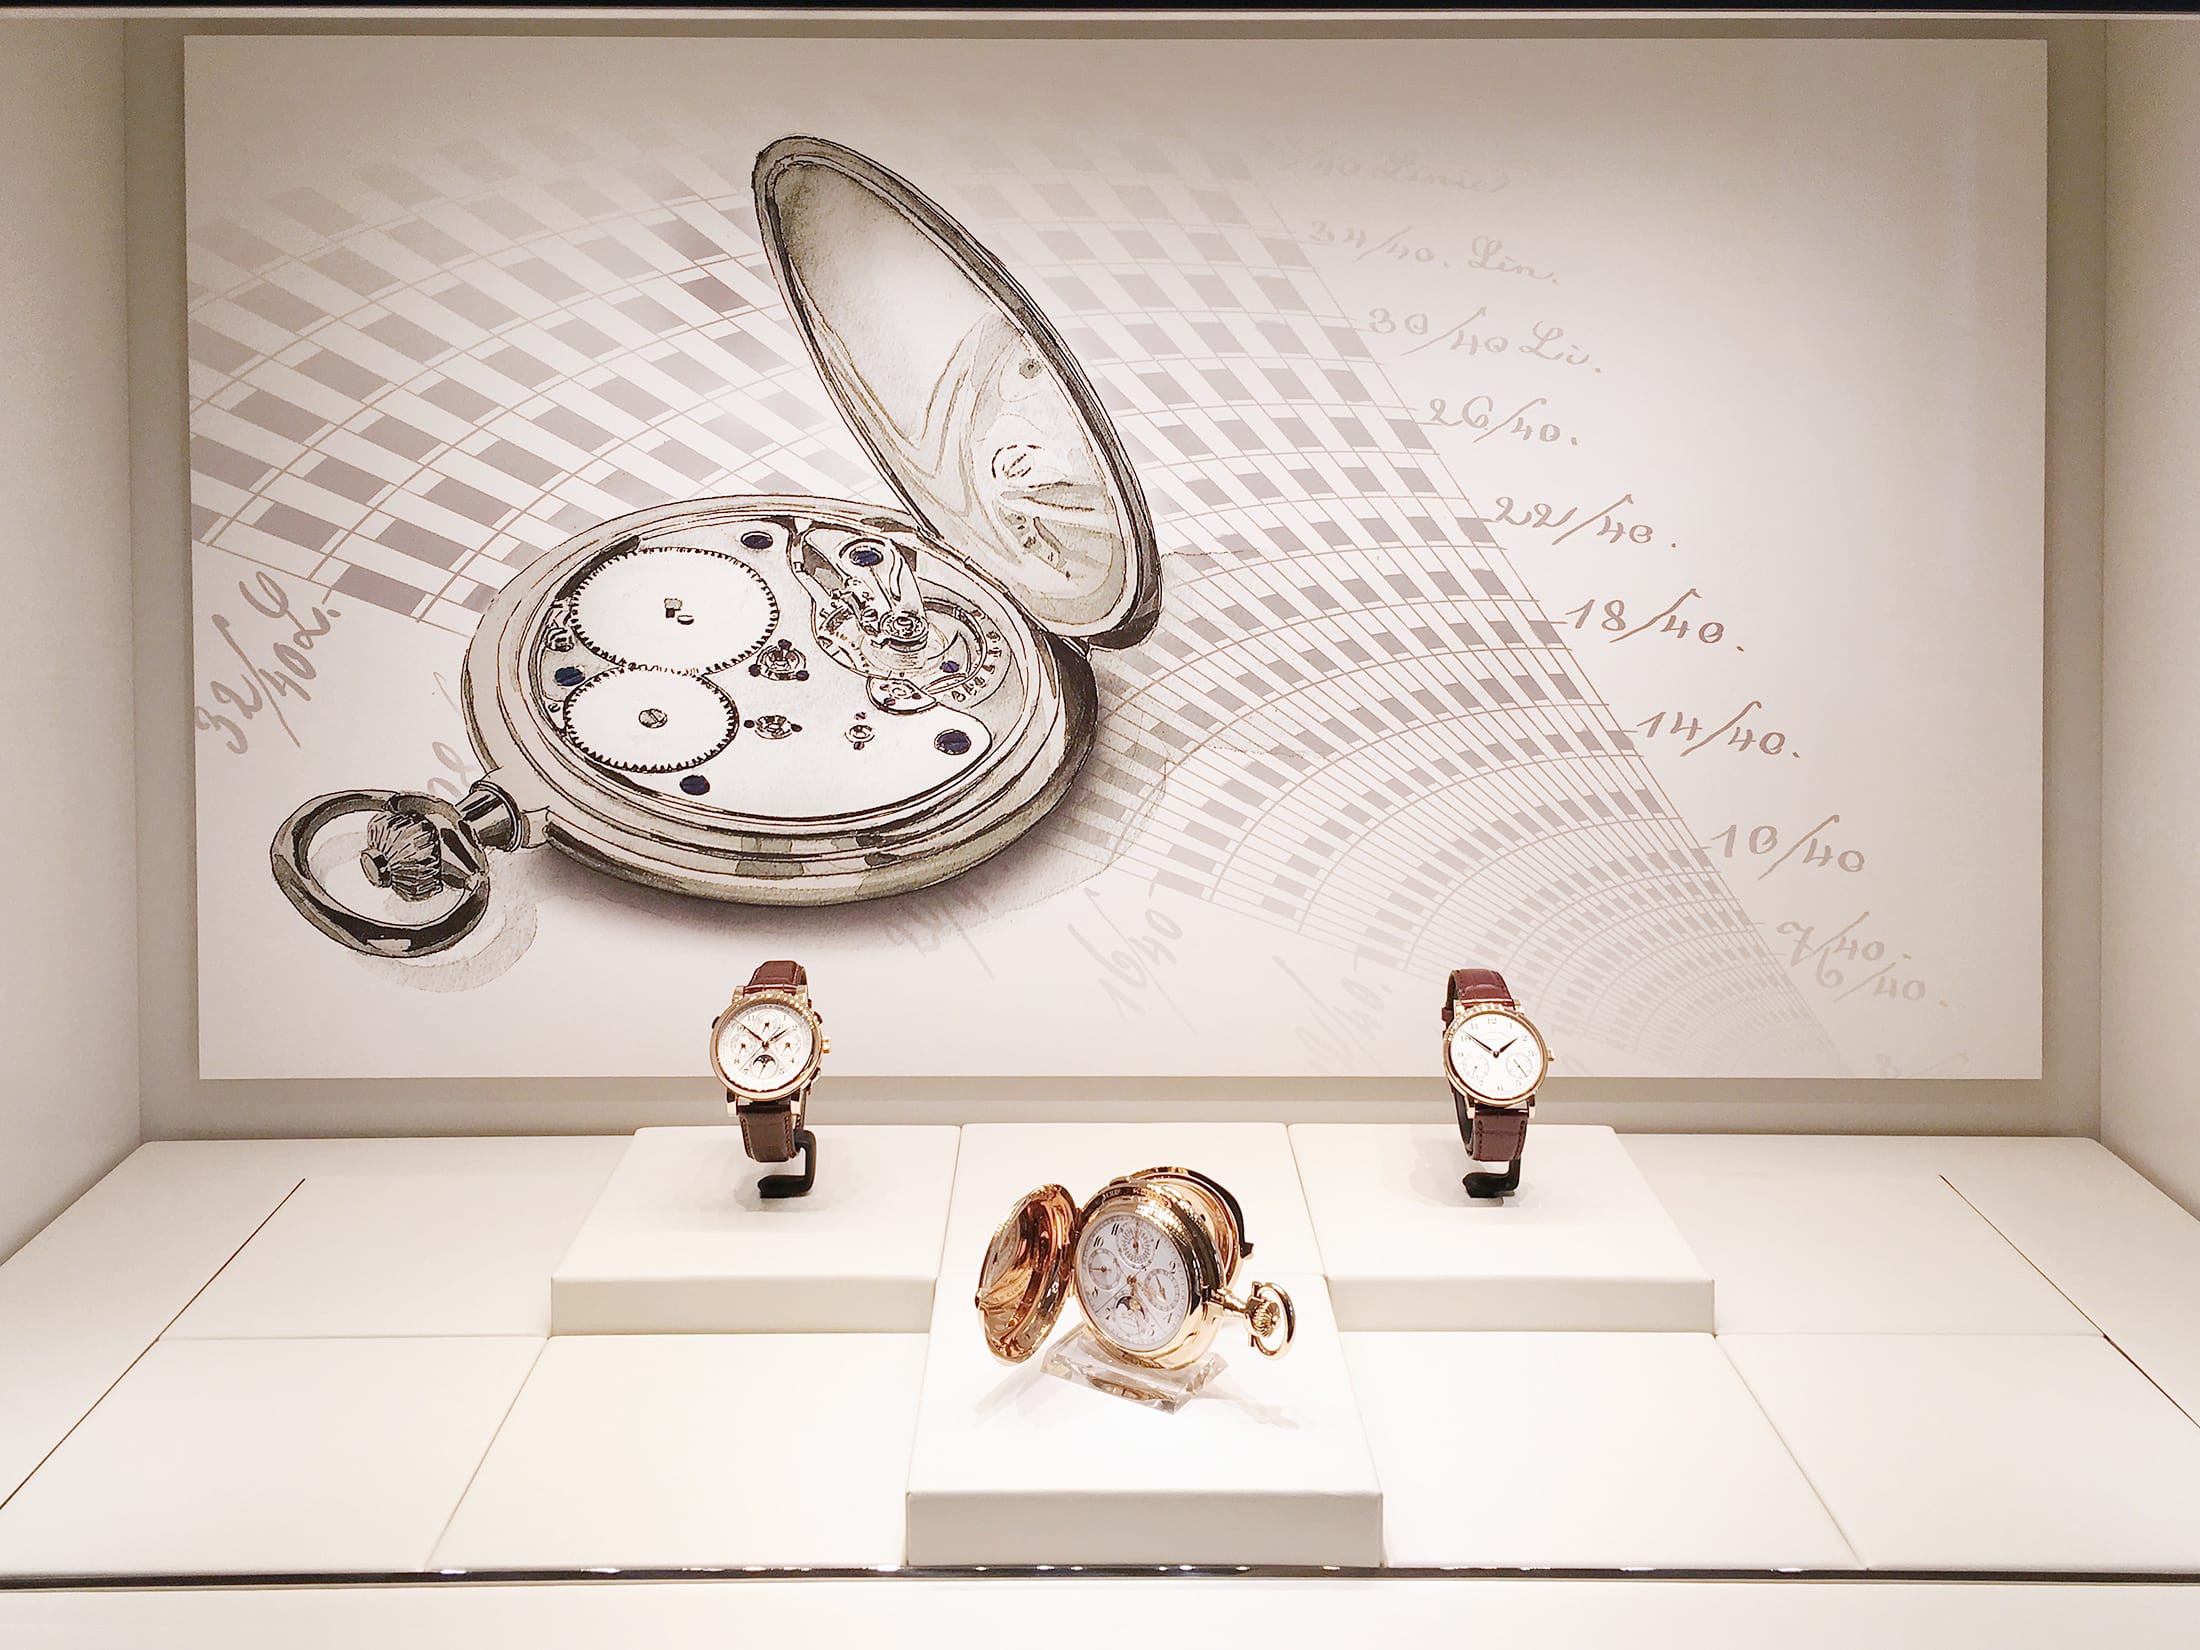 A. Lange und Söhne different watch models and pocket watch drawn in watercolor as background